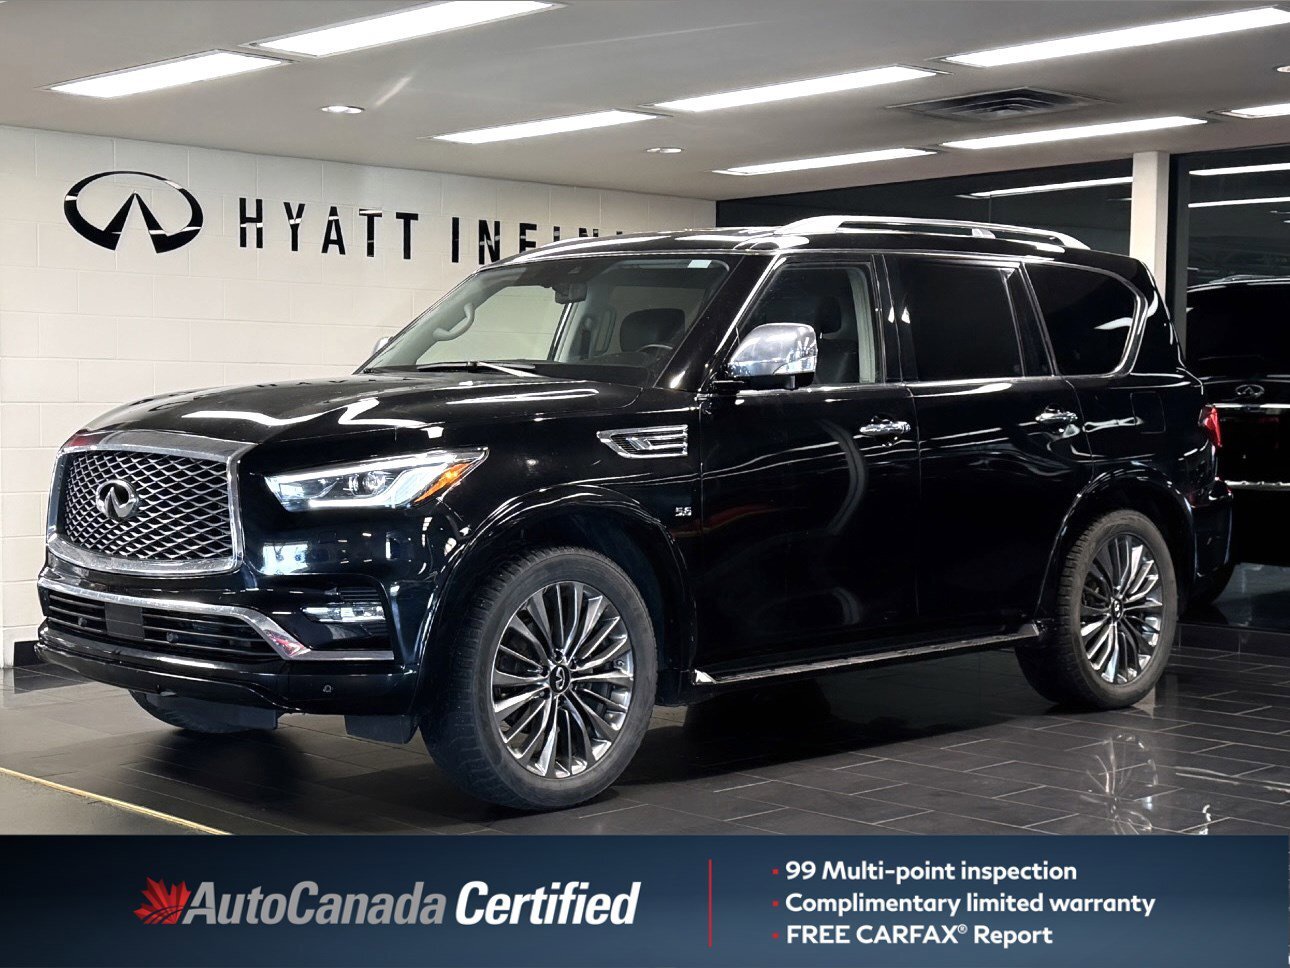 2019 Infiniti QX80 7 Passenger ProACTIVE - One Owner | No Accidents |